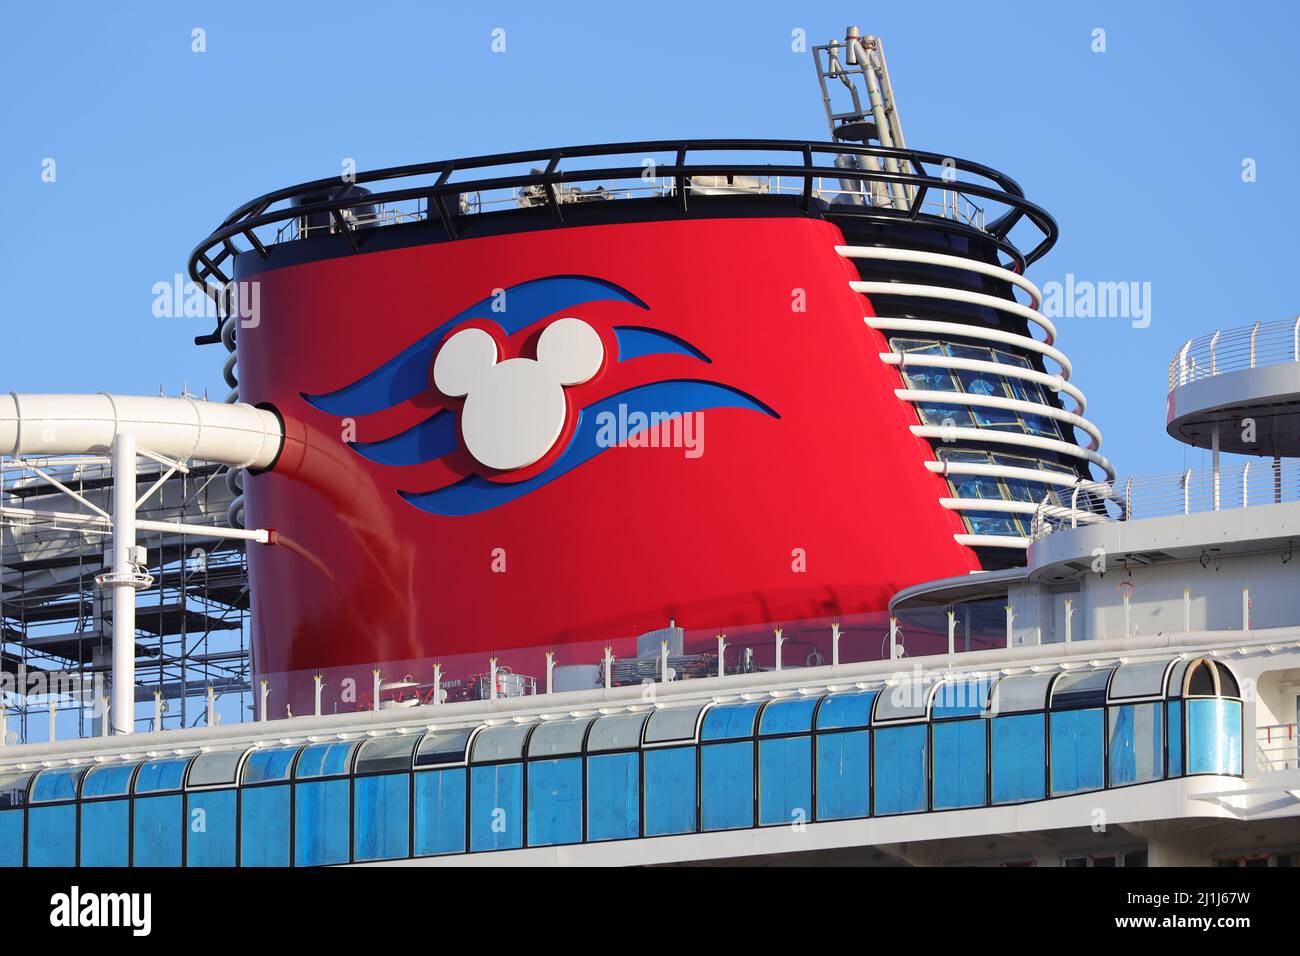 The Disney Wish cruise ship is moored in front of the Meyer shipyard in Papenburg on February 26, 2022. Stock Photo